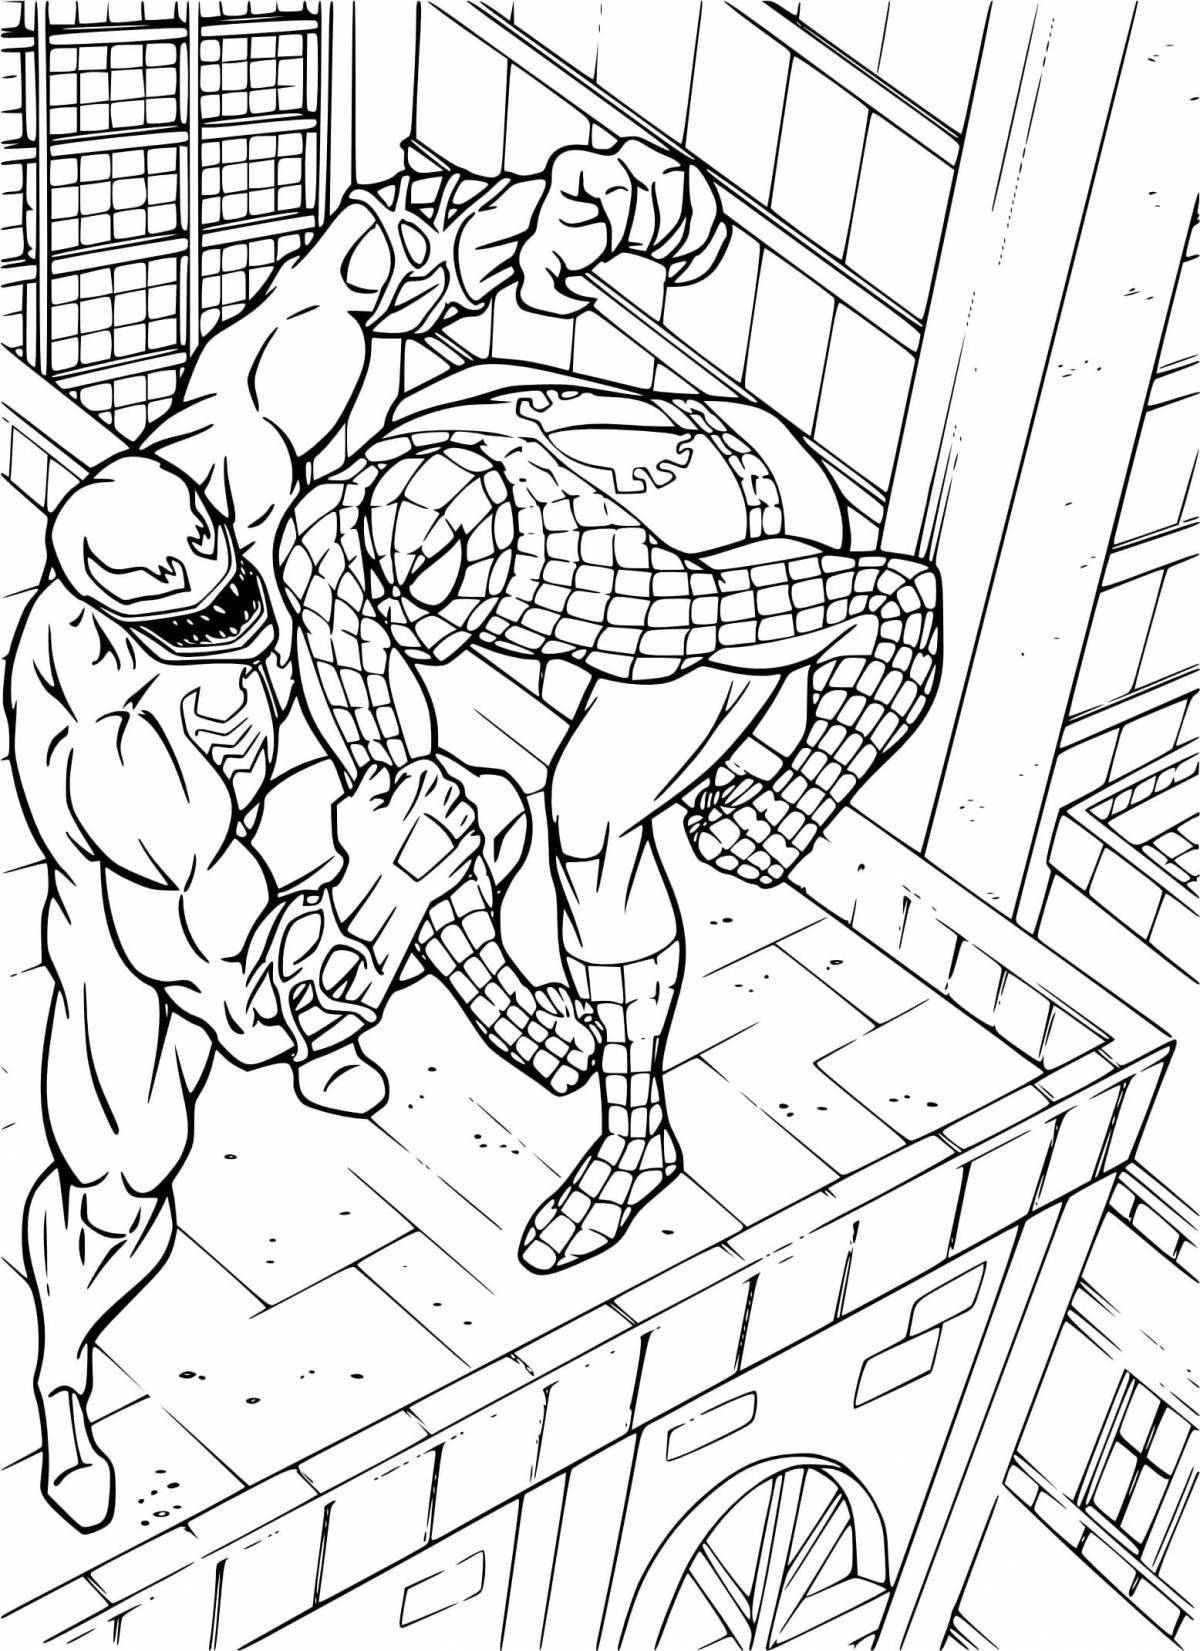 Exquisite spiderman coloring book for kids